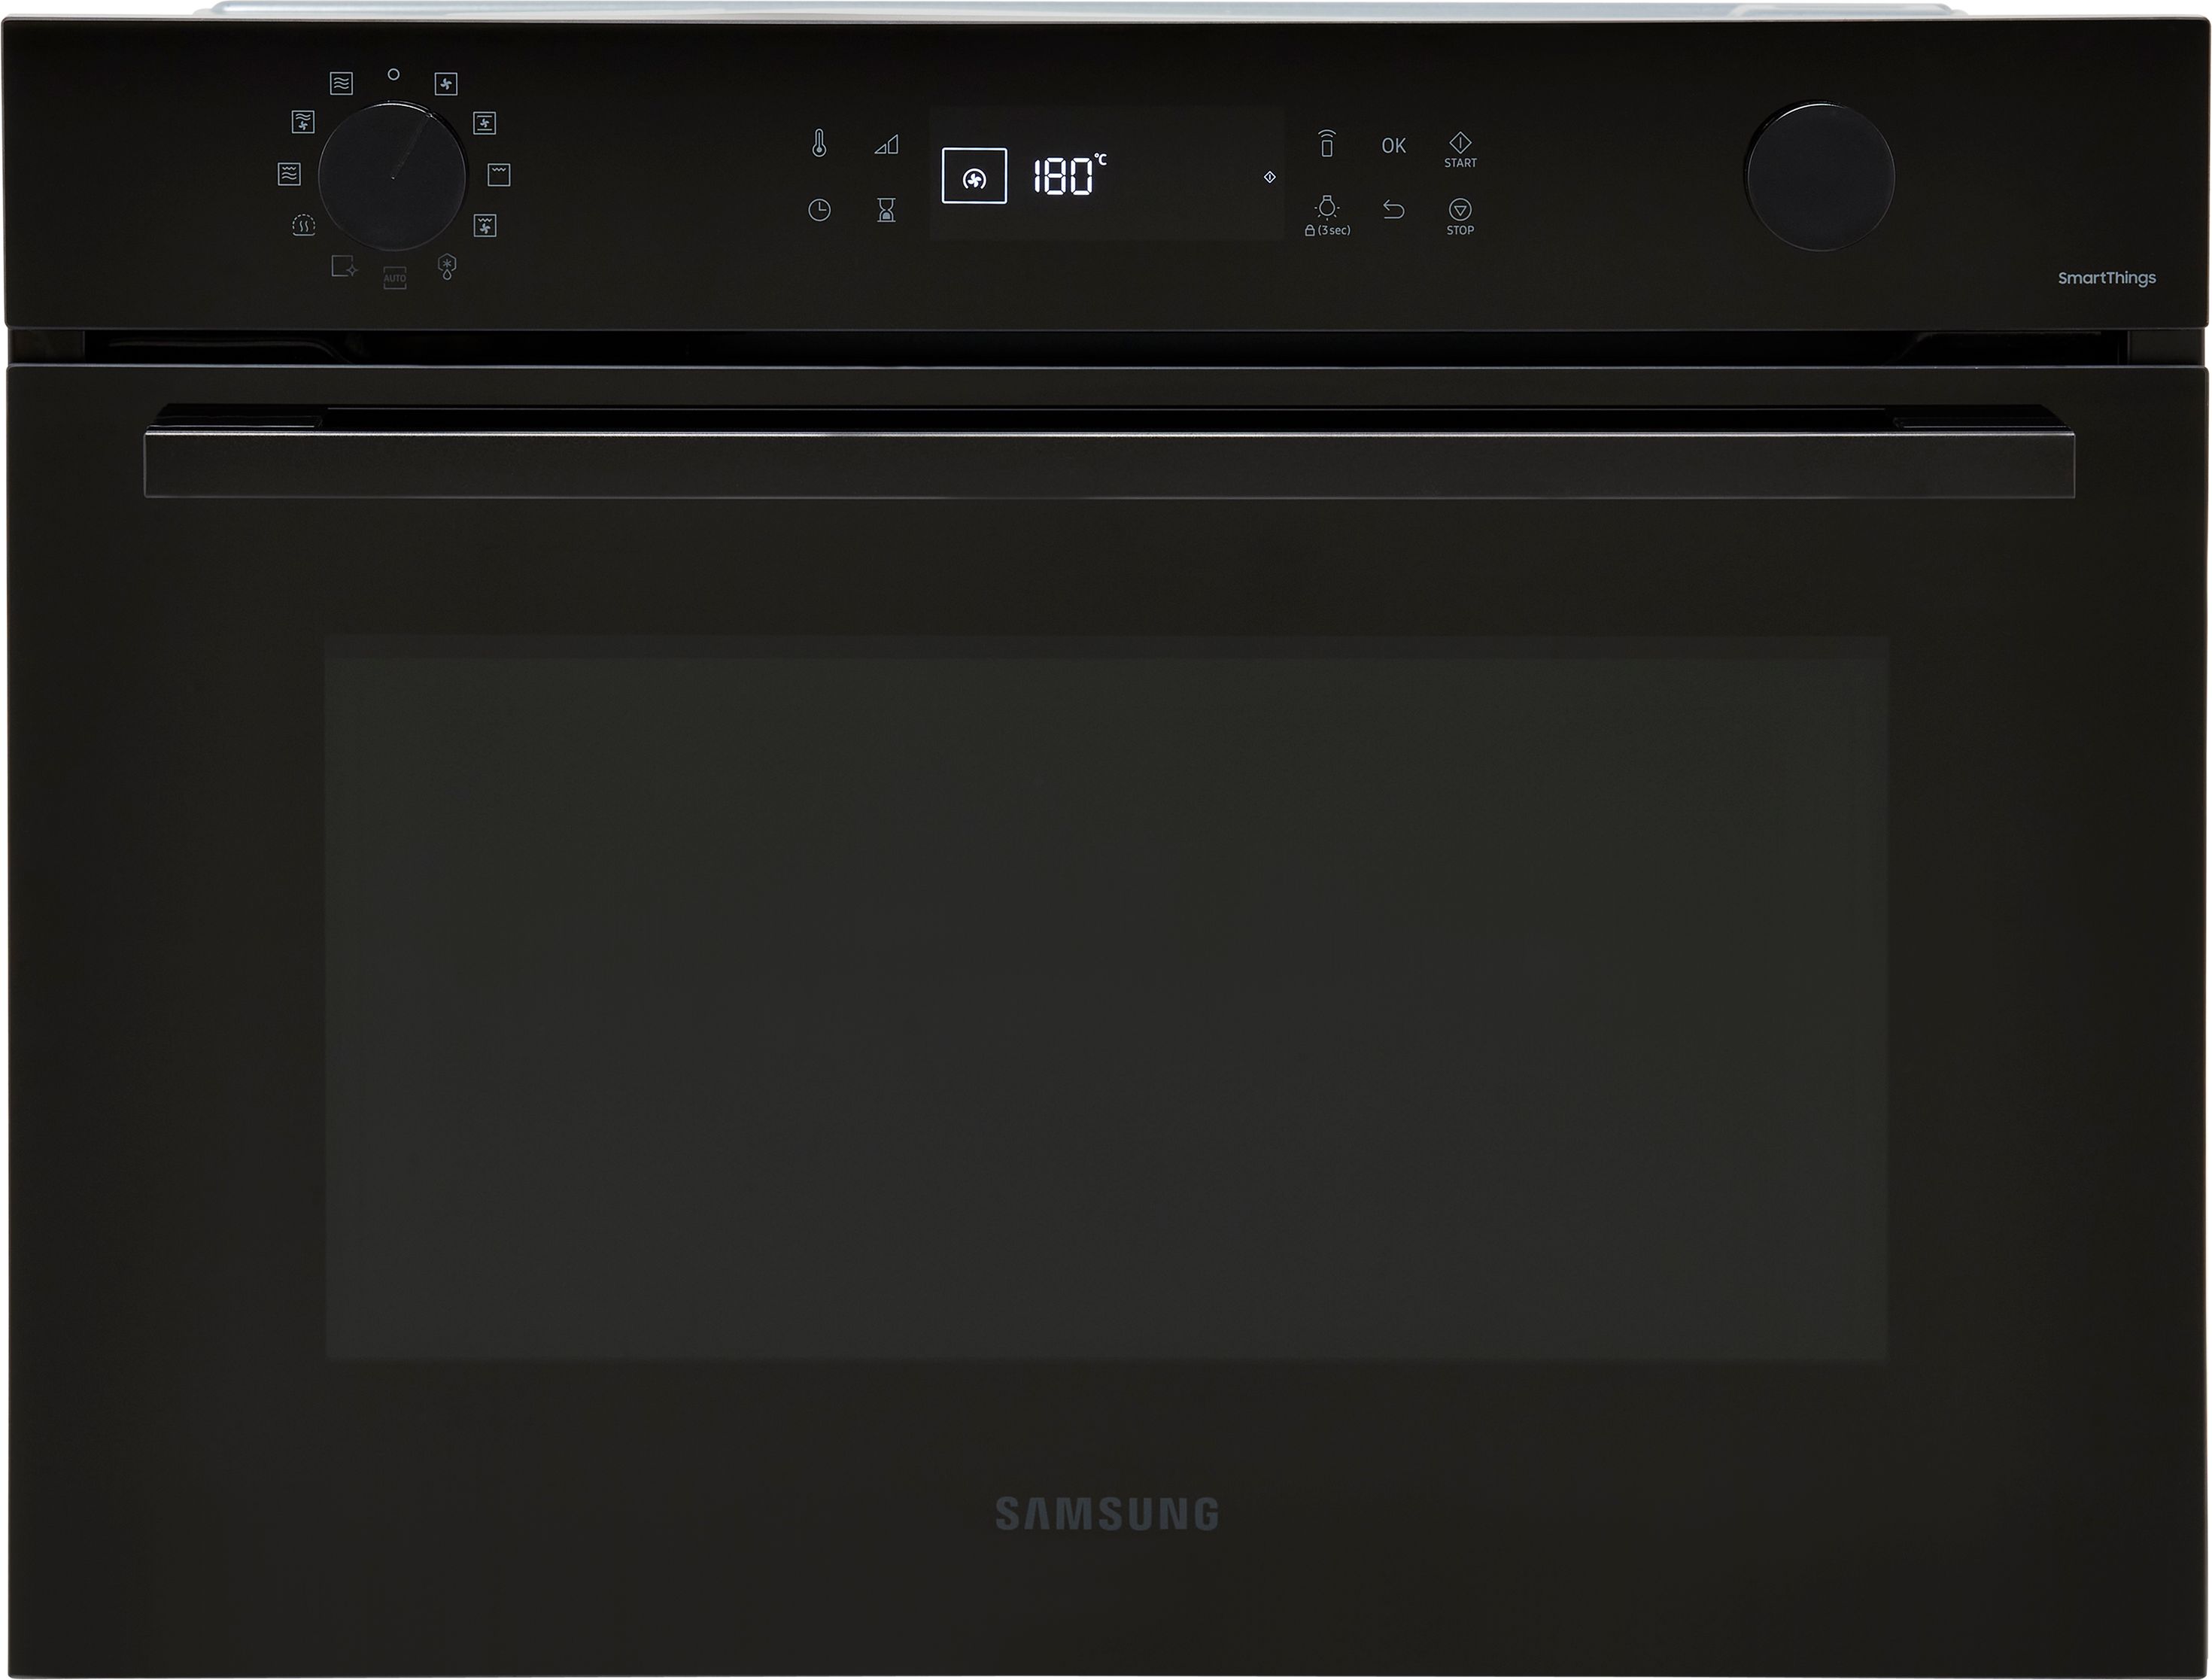 Samsung Bespoke Series 4 NQ5B4553FBK Built In Compact Electric Single Oven with Microwave Function - Black, Black